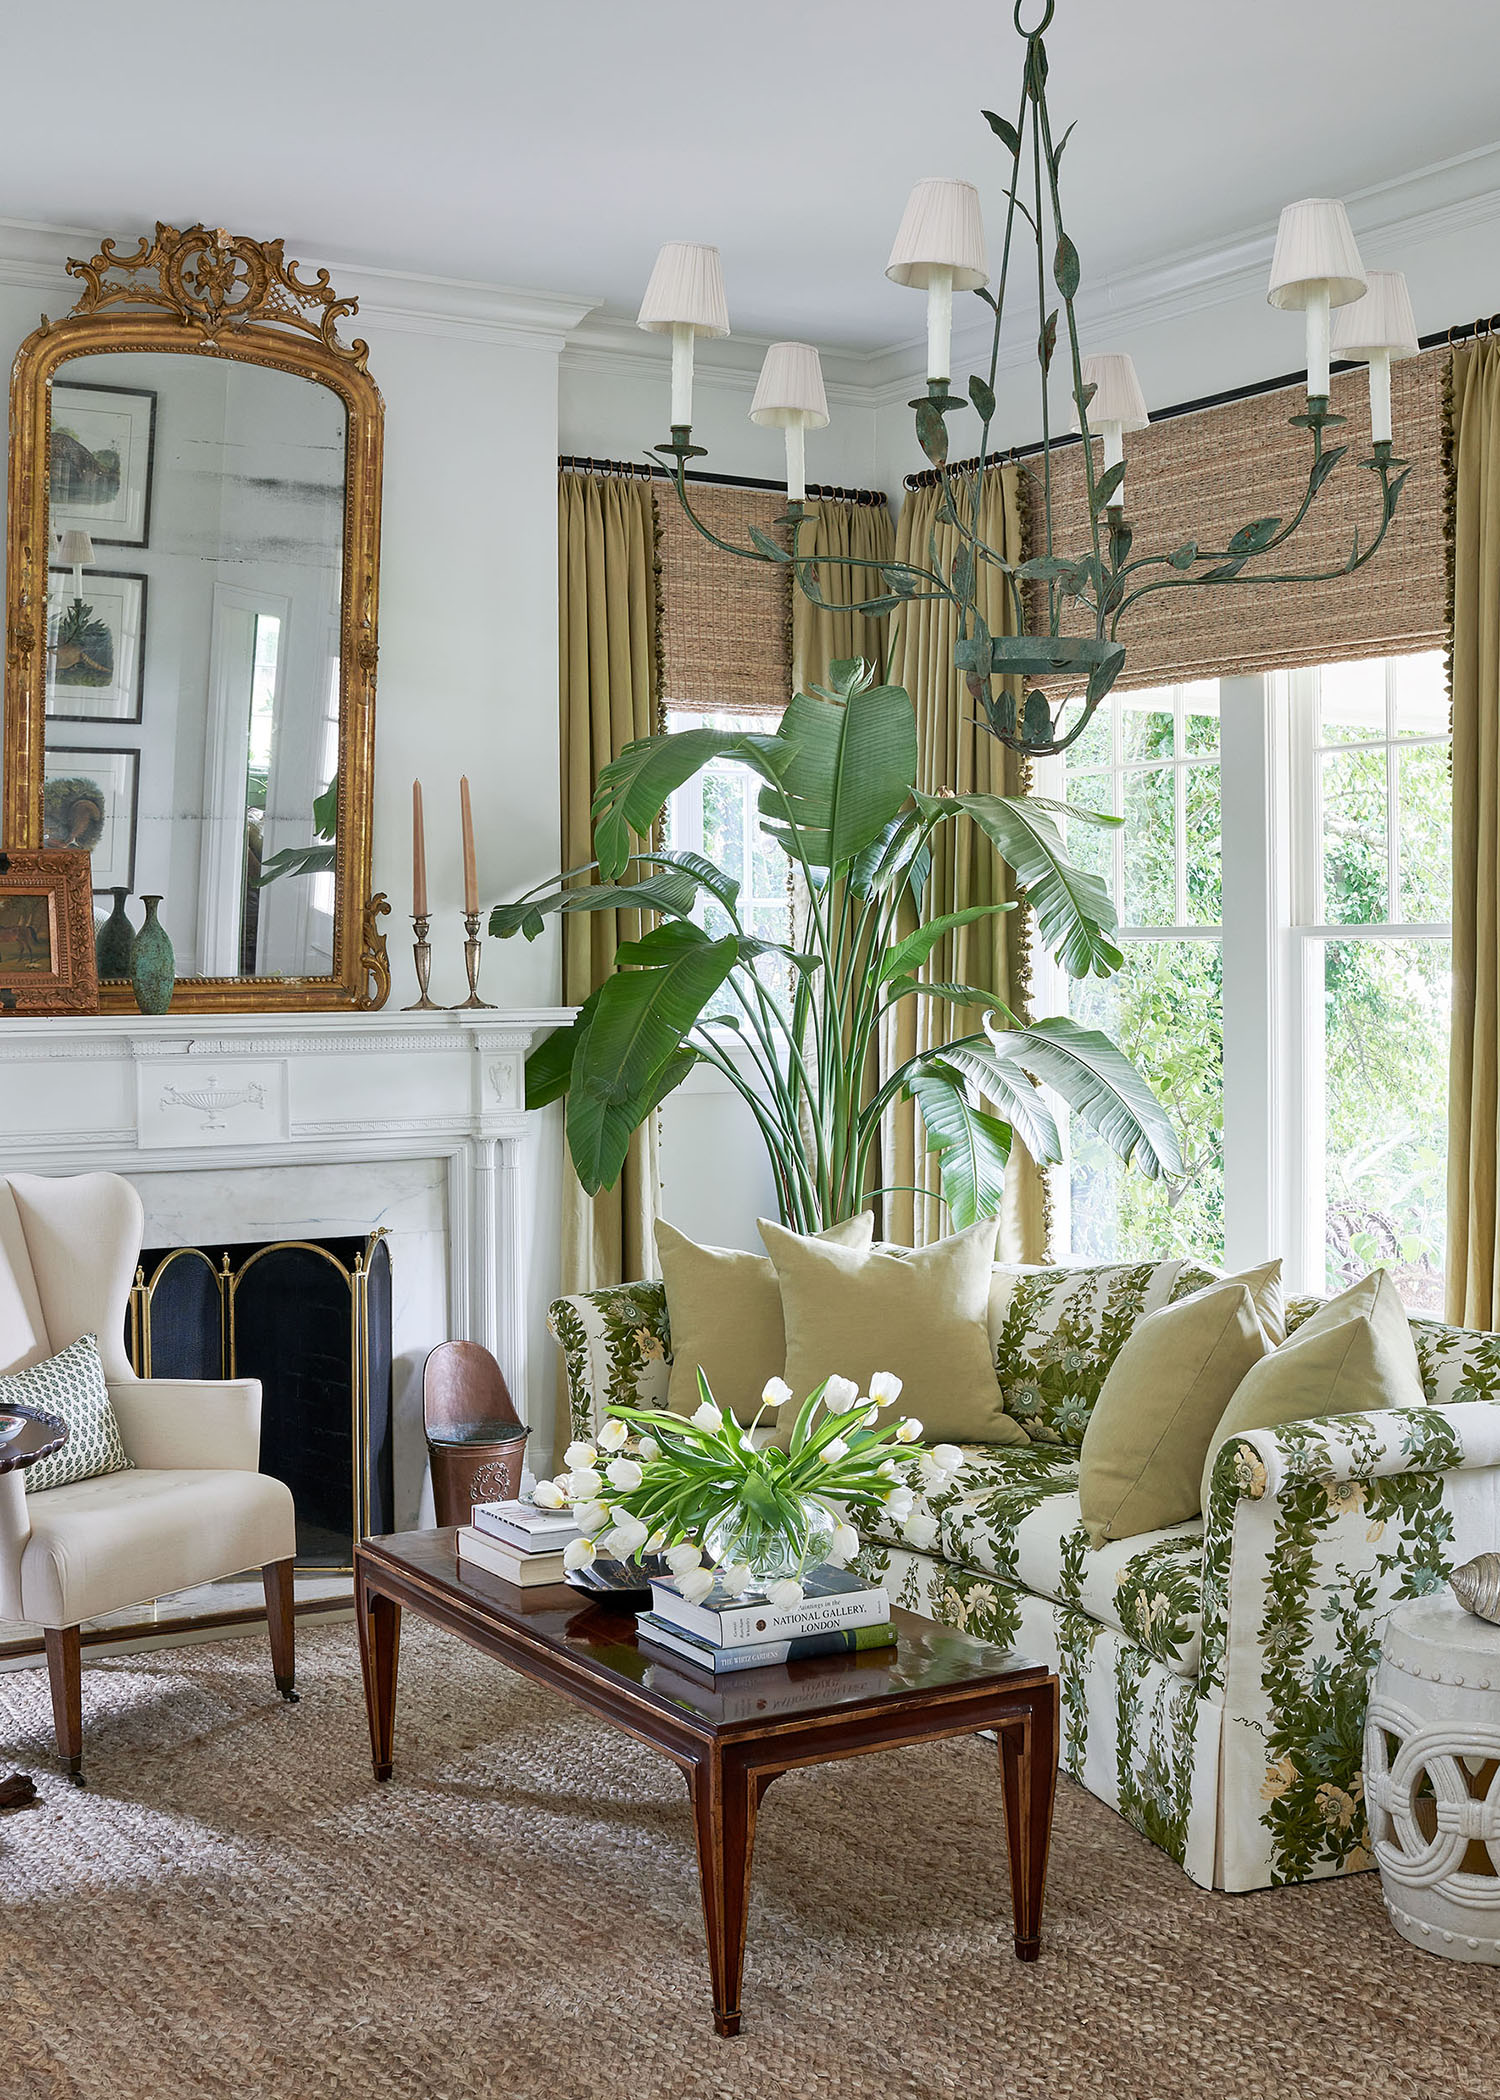 Green living room  in Arkansas Home by Heather Chadduck in Veranda Magazine by Alison Gootee photography